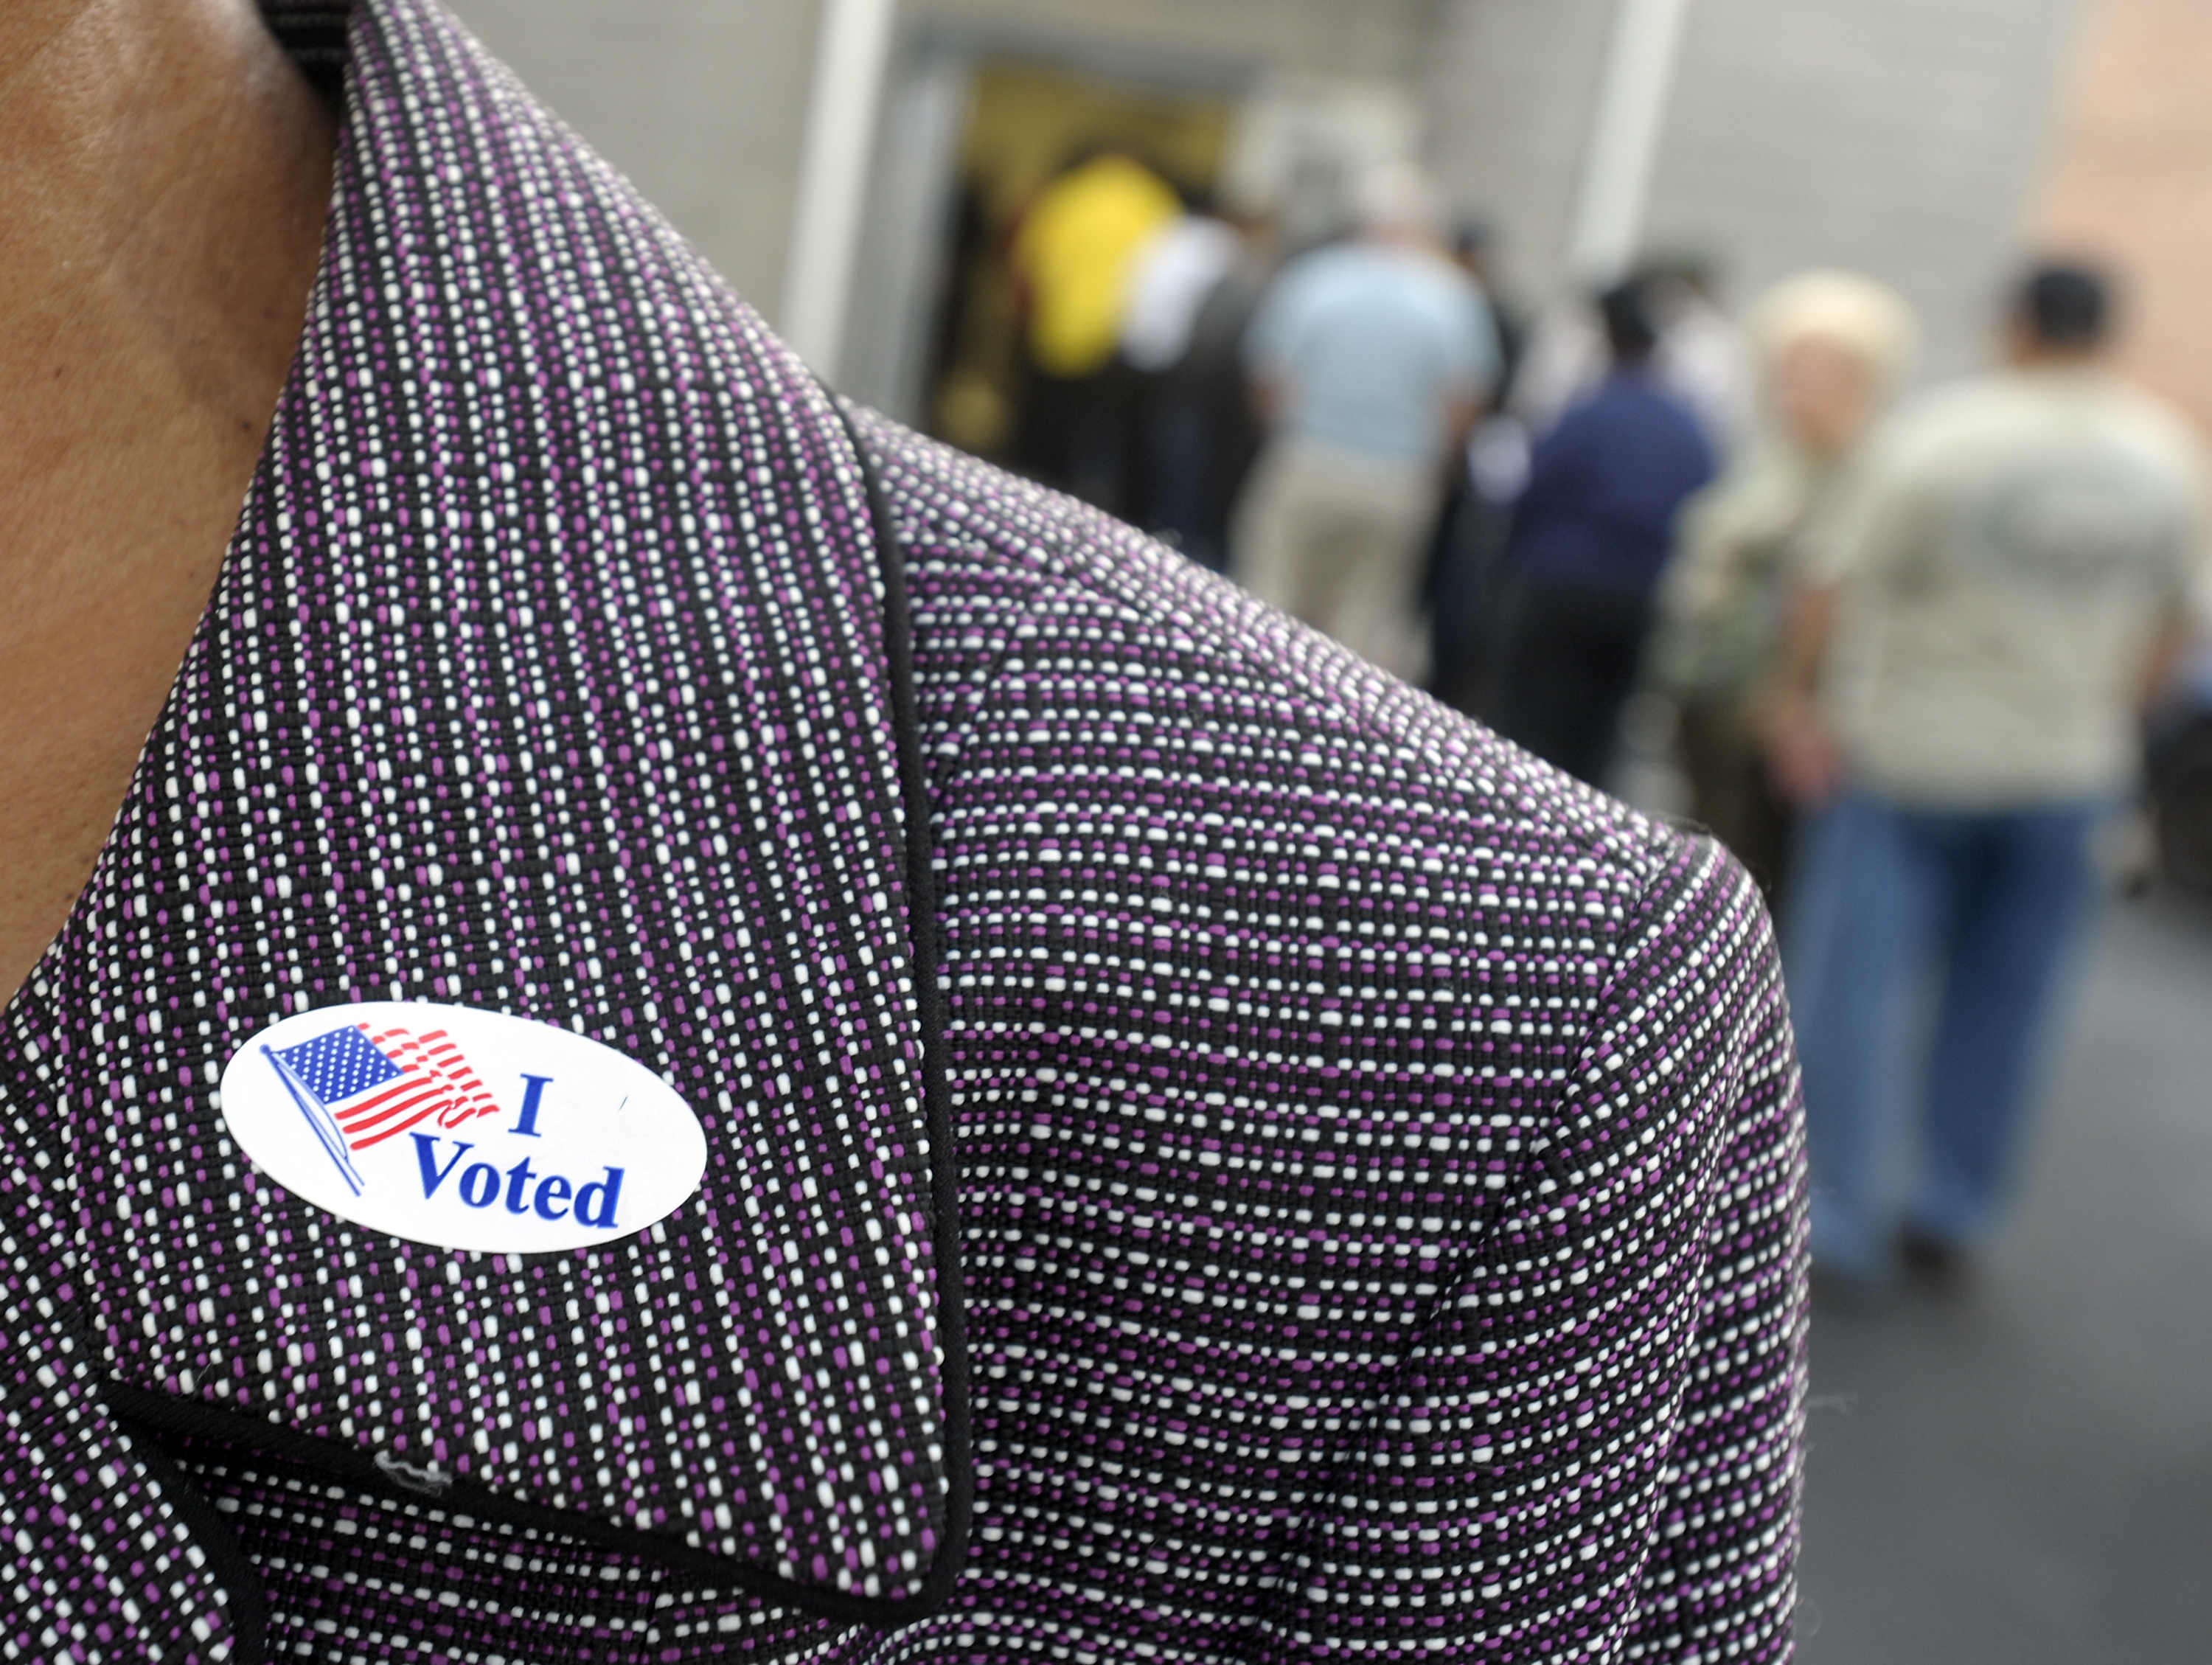 A voter displays an "I Voted" sticker on her lapel after voting as others wait in line for the first day of early voting on Oct. 18, 2012, in Wilson, N.C. (Sara D. Davis—Getty Images)